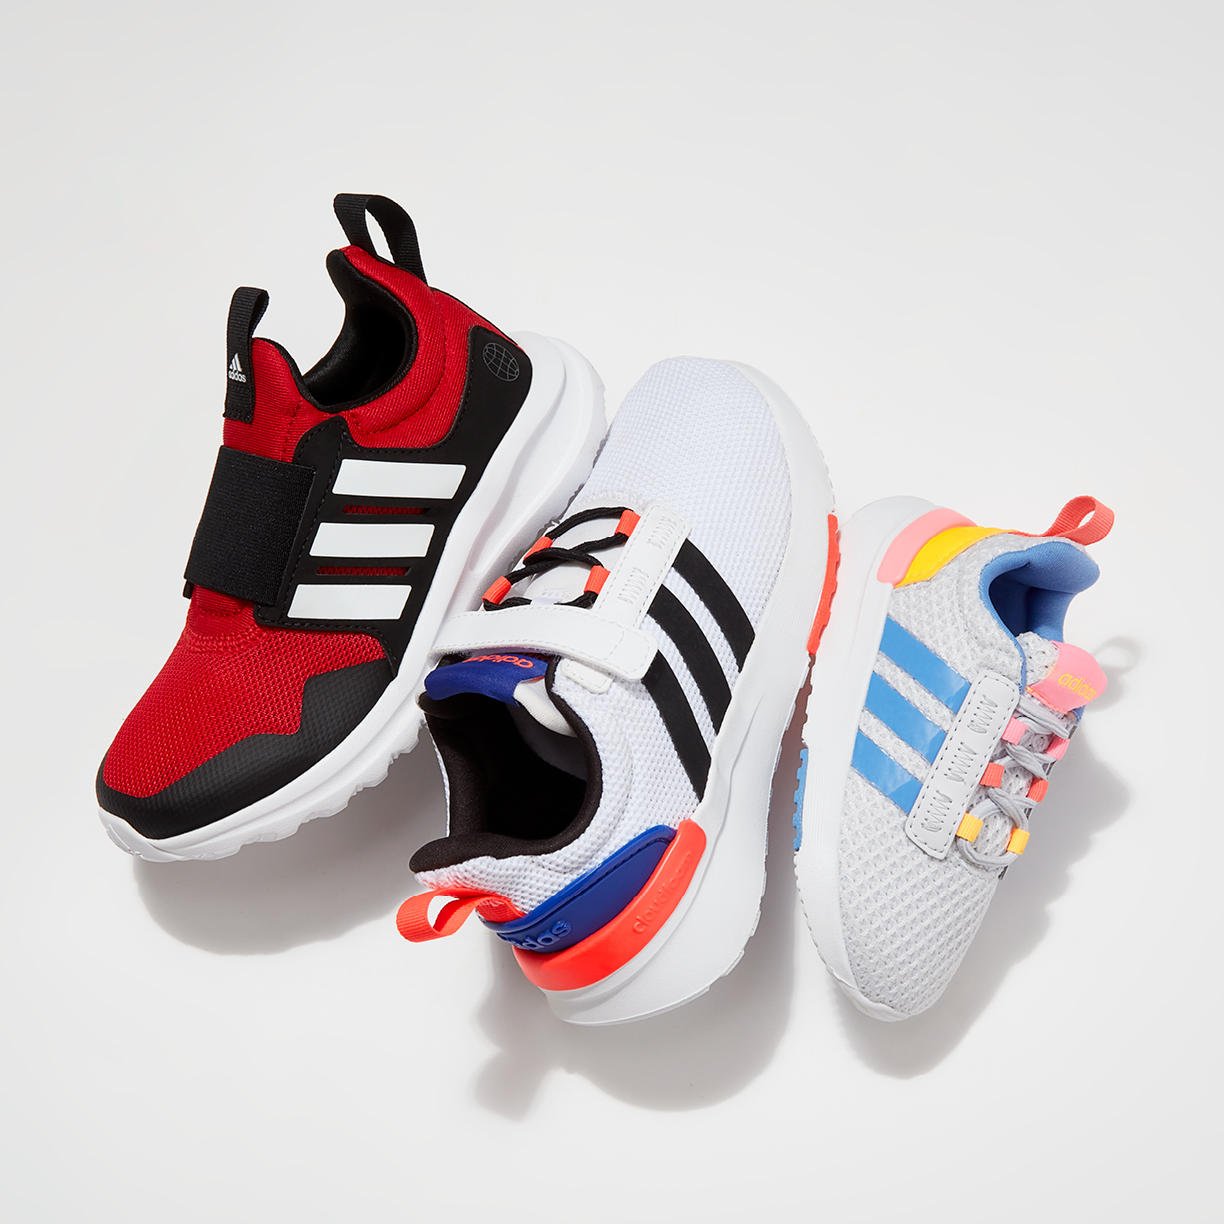 adidas Kids' Activewear & Shoes from \\$20